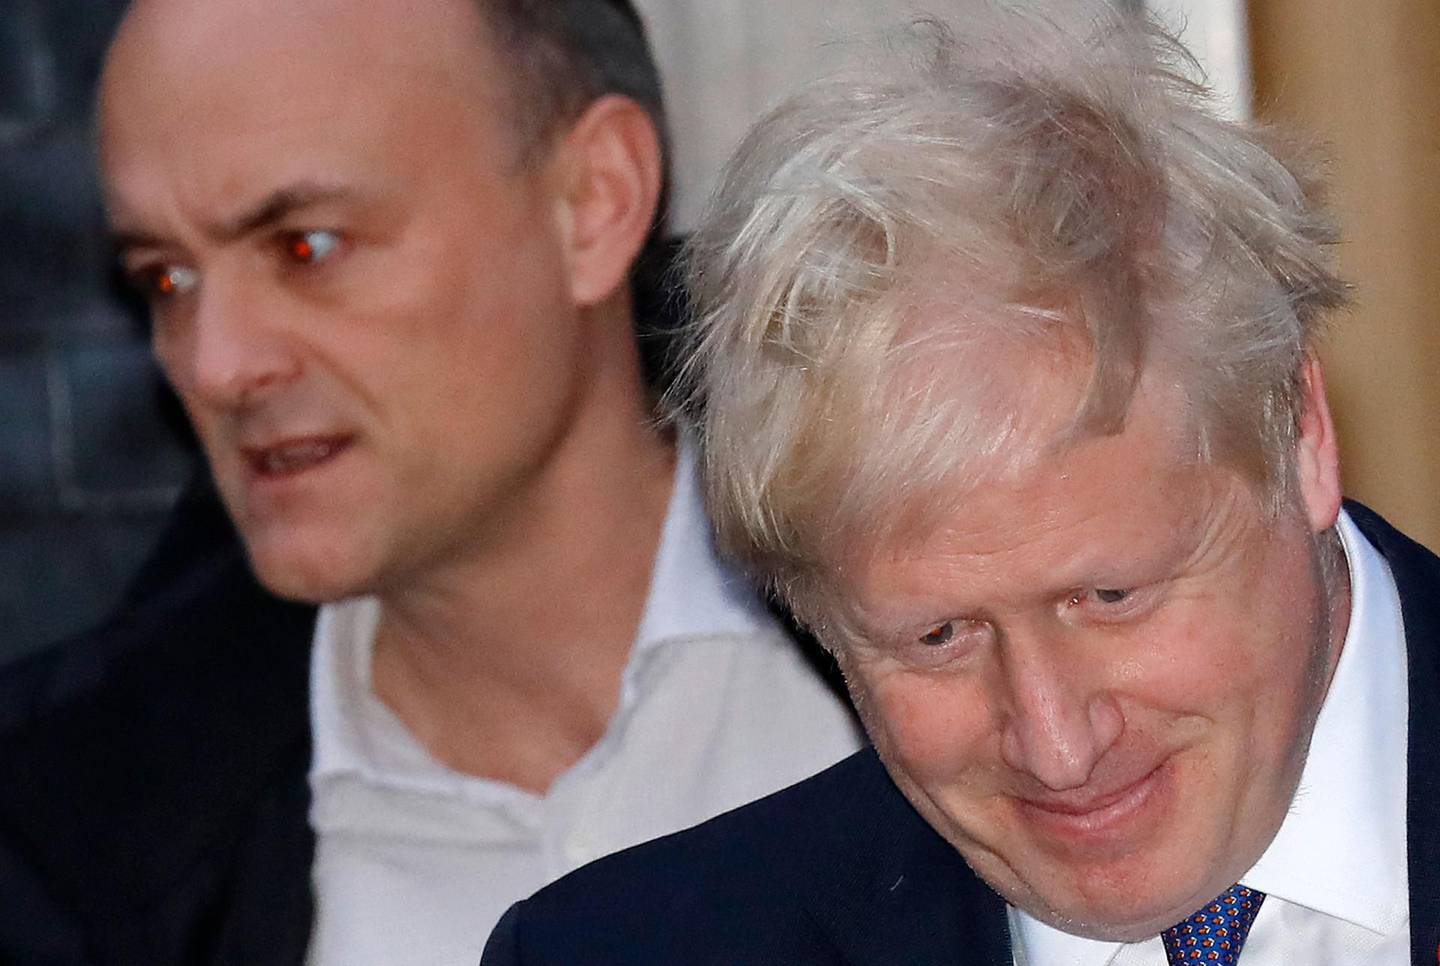 (FILES) In this file photo taken on October 28, 2019 Britain's Prime Minister Boris Johnson (R) and Number 10 special advisor Dominic Cummings leave from 10 Downing Street in central London. Brexit mastermind Dominic Cummings, the notoriously combative former top adviser to Prime Minister Boris Johnson, is not shirking his latest fight -- but this time has the UK leader himself in his sights. Cummings, 49, had lain low after acrimoniously quitting Downing Street in December. But on April 23, 2021, he returned with a bang, releasing a 1,100-word blog that detailed a series of explosive allegations against the Conservative leader. / AFP / Tolga AKMEN
